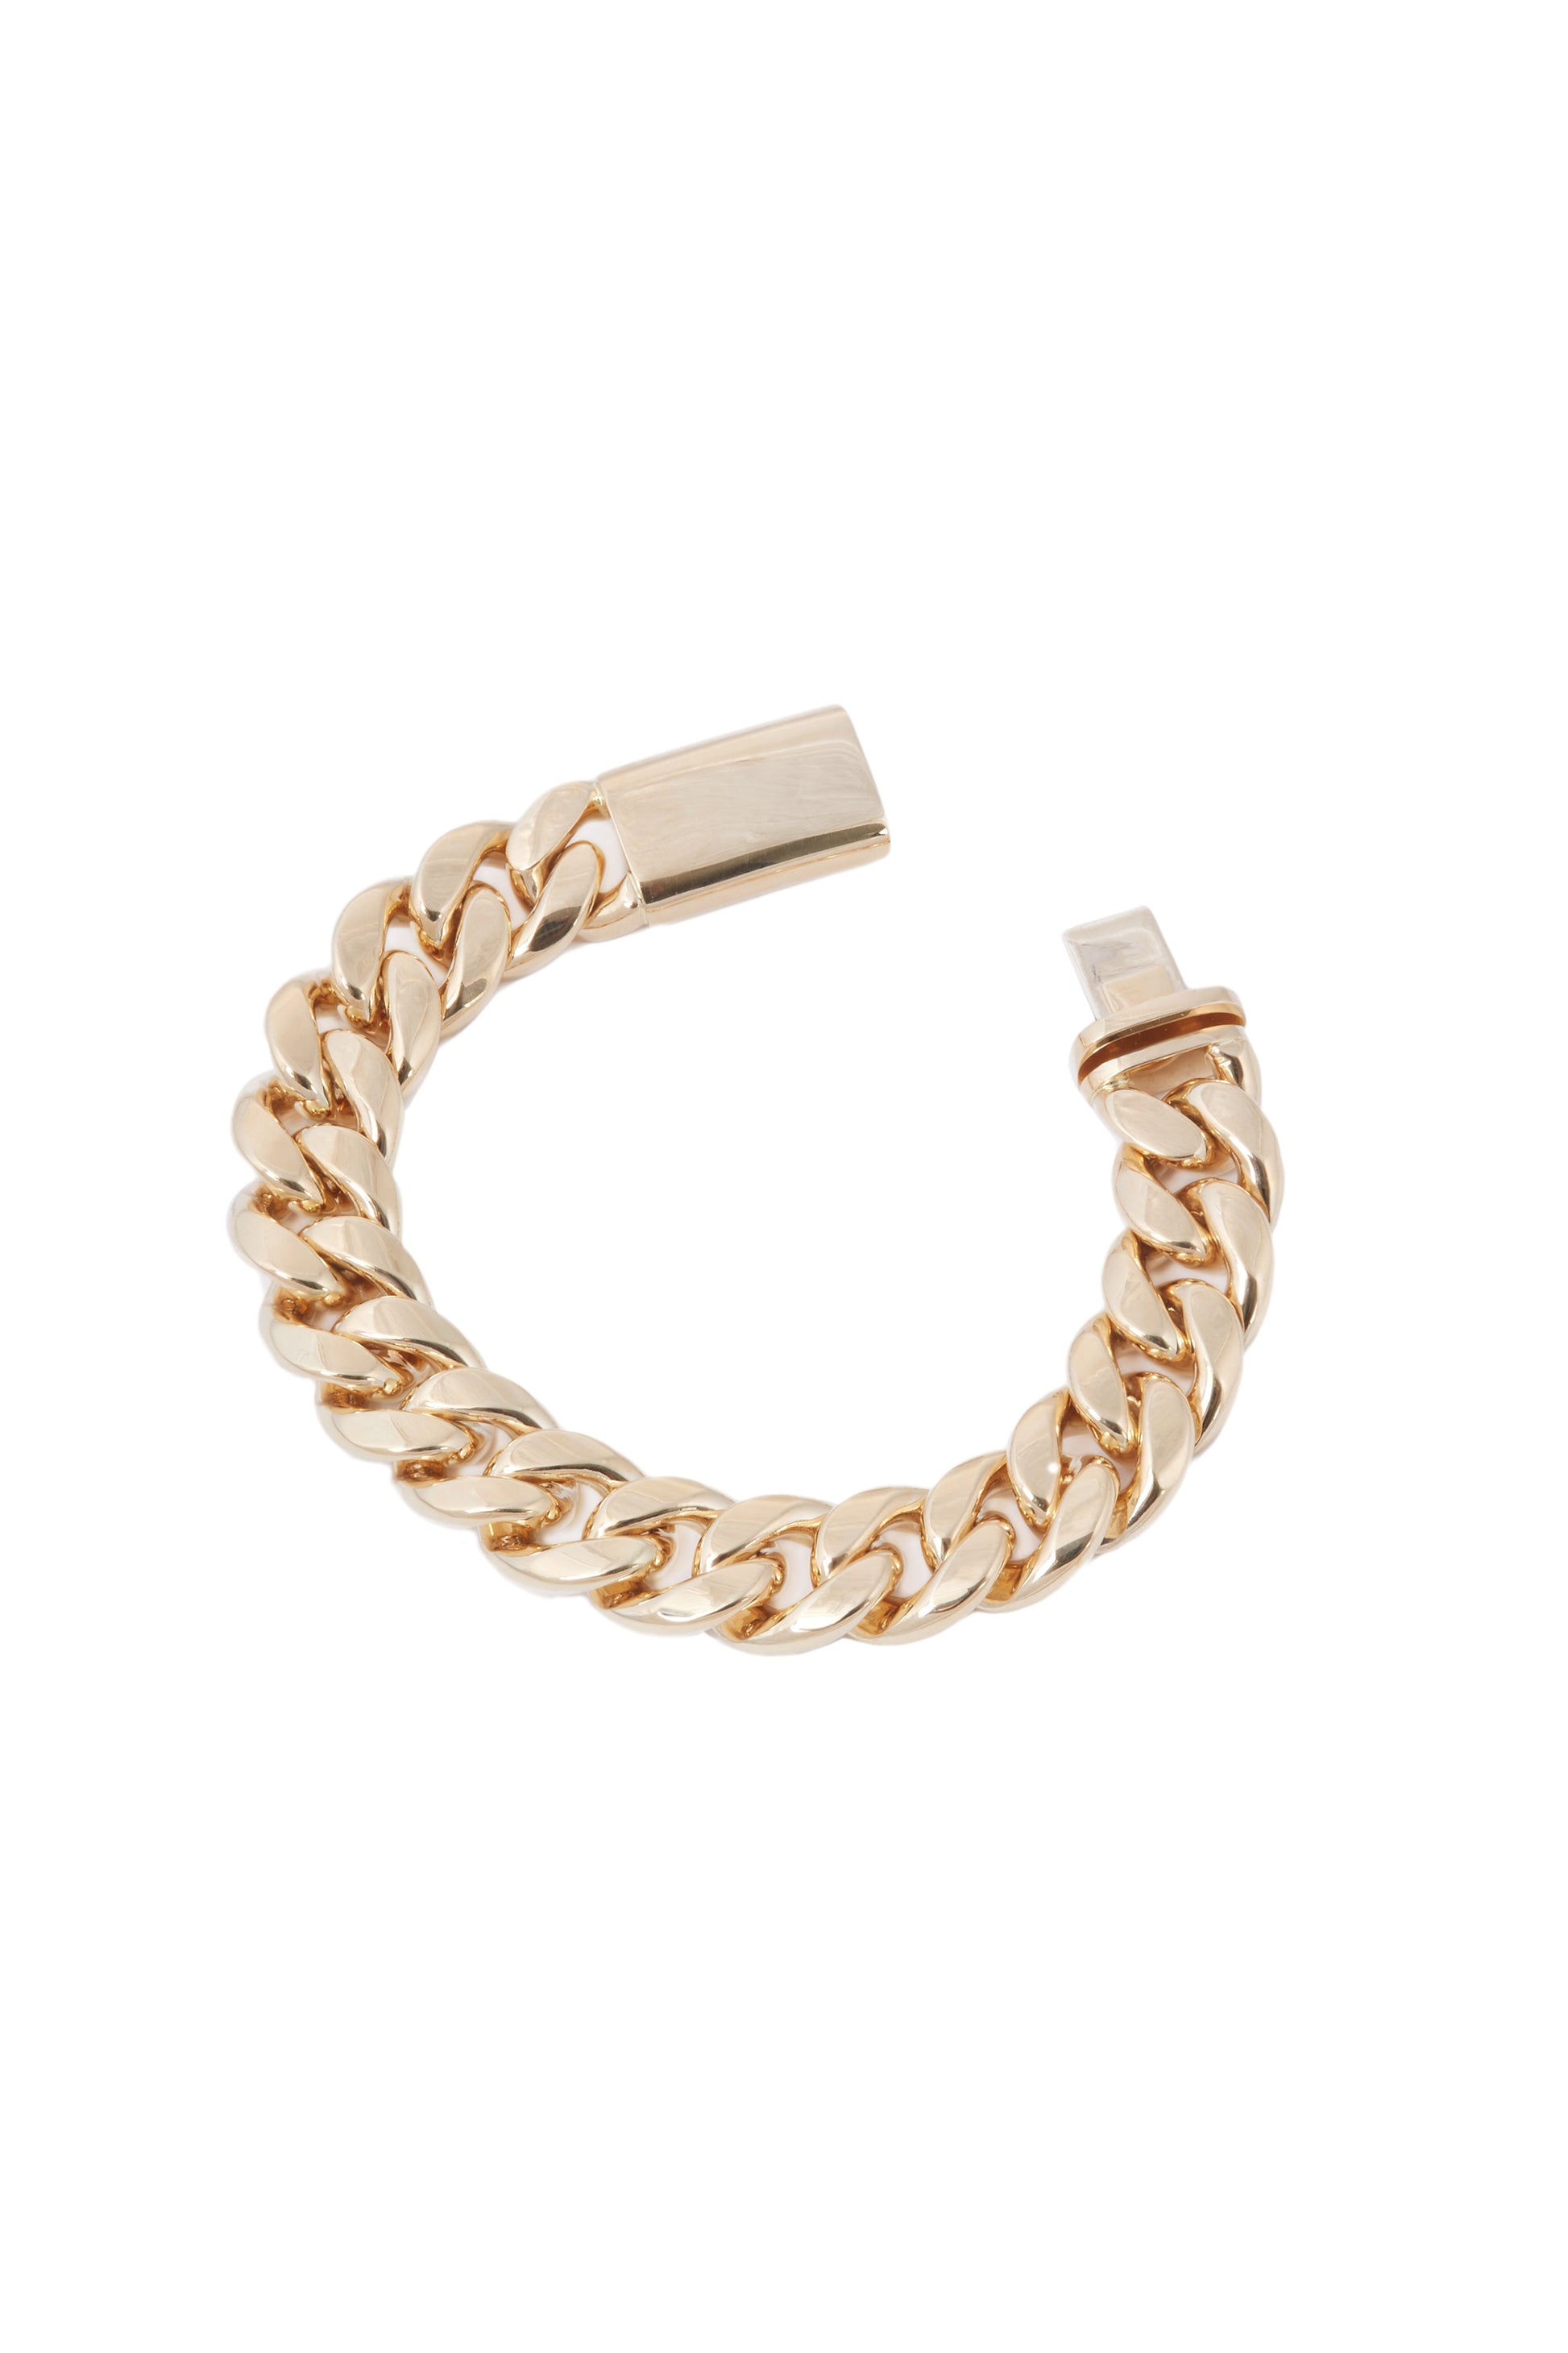 SIDNEY GARBER-Curb Chain Bracelet - 17cm - Yellow Gold-YELLOW GOLD